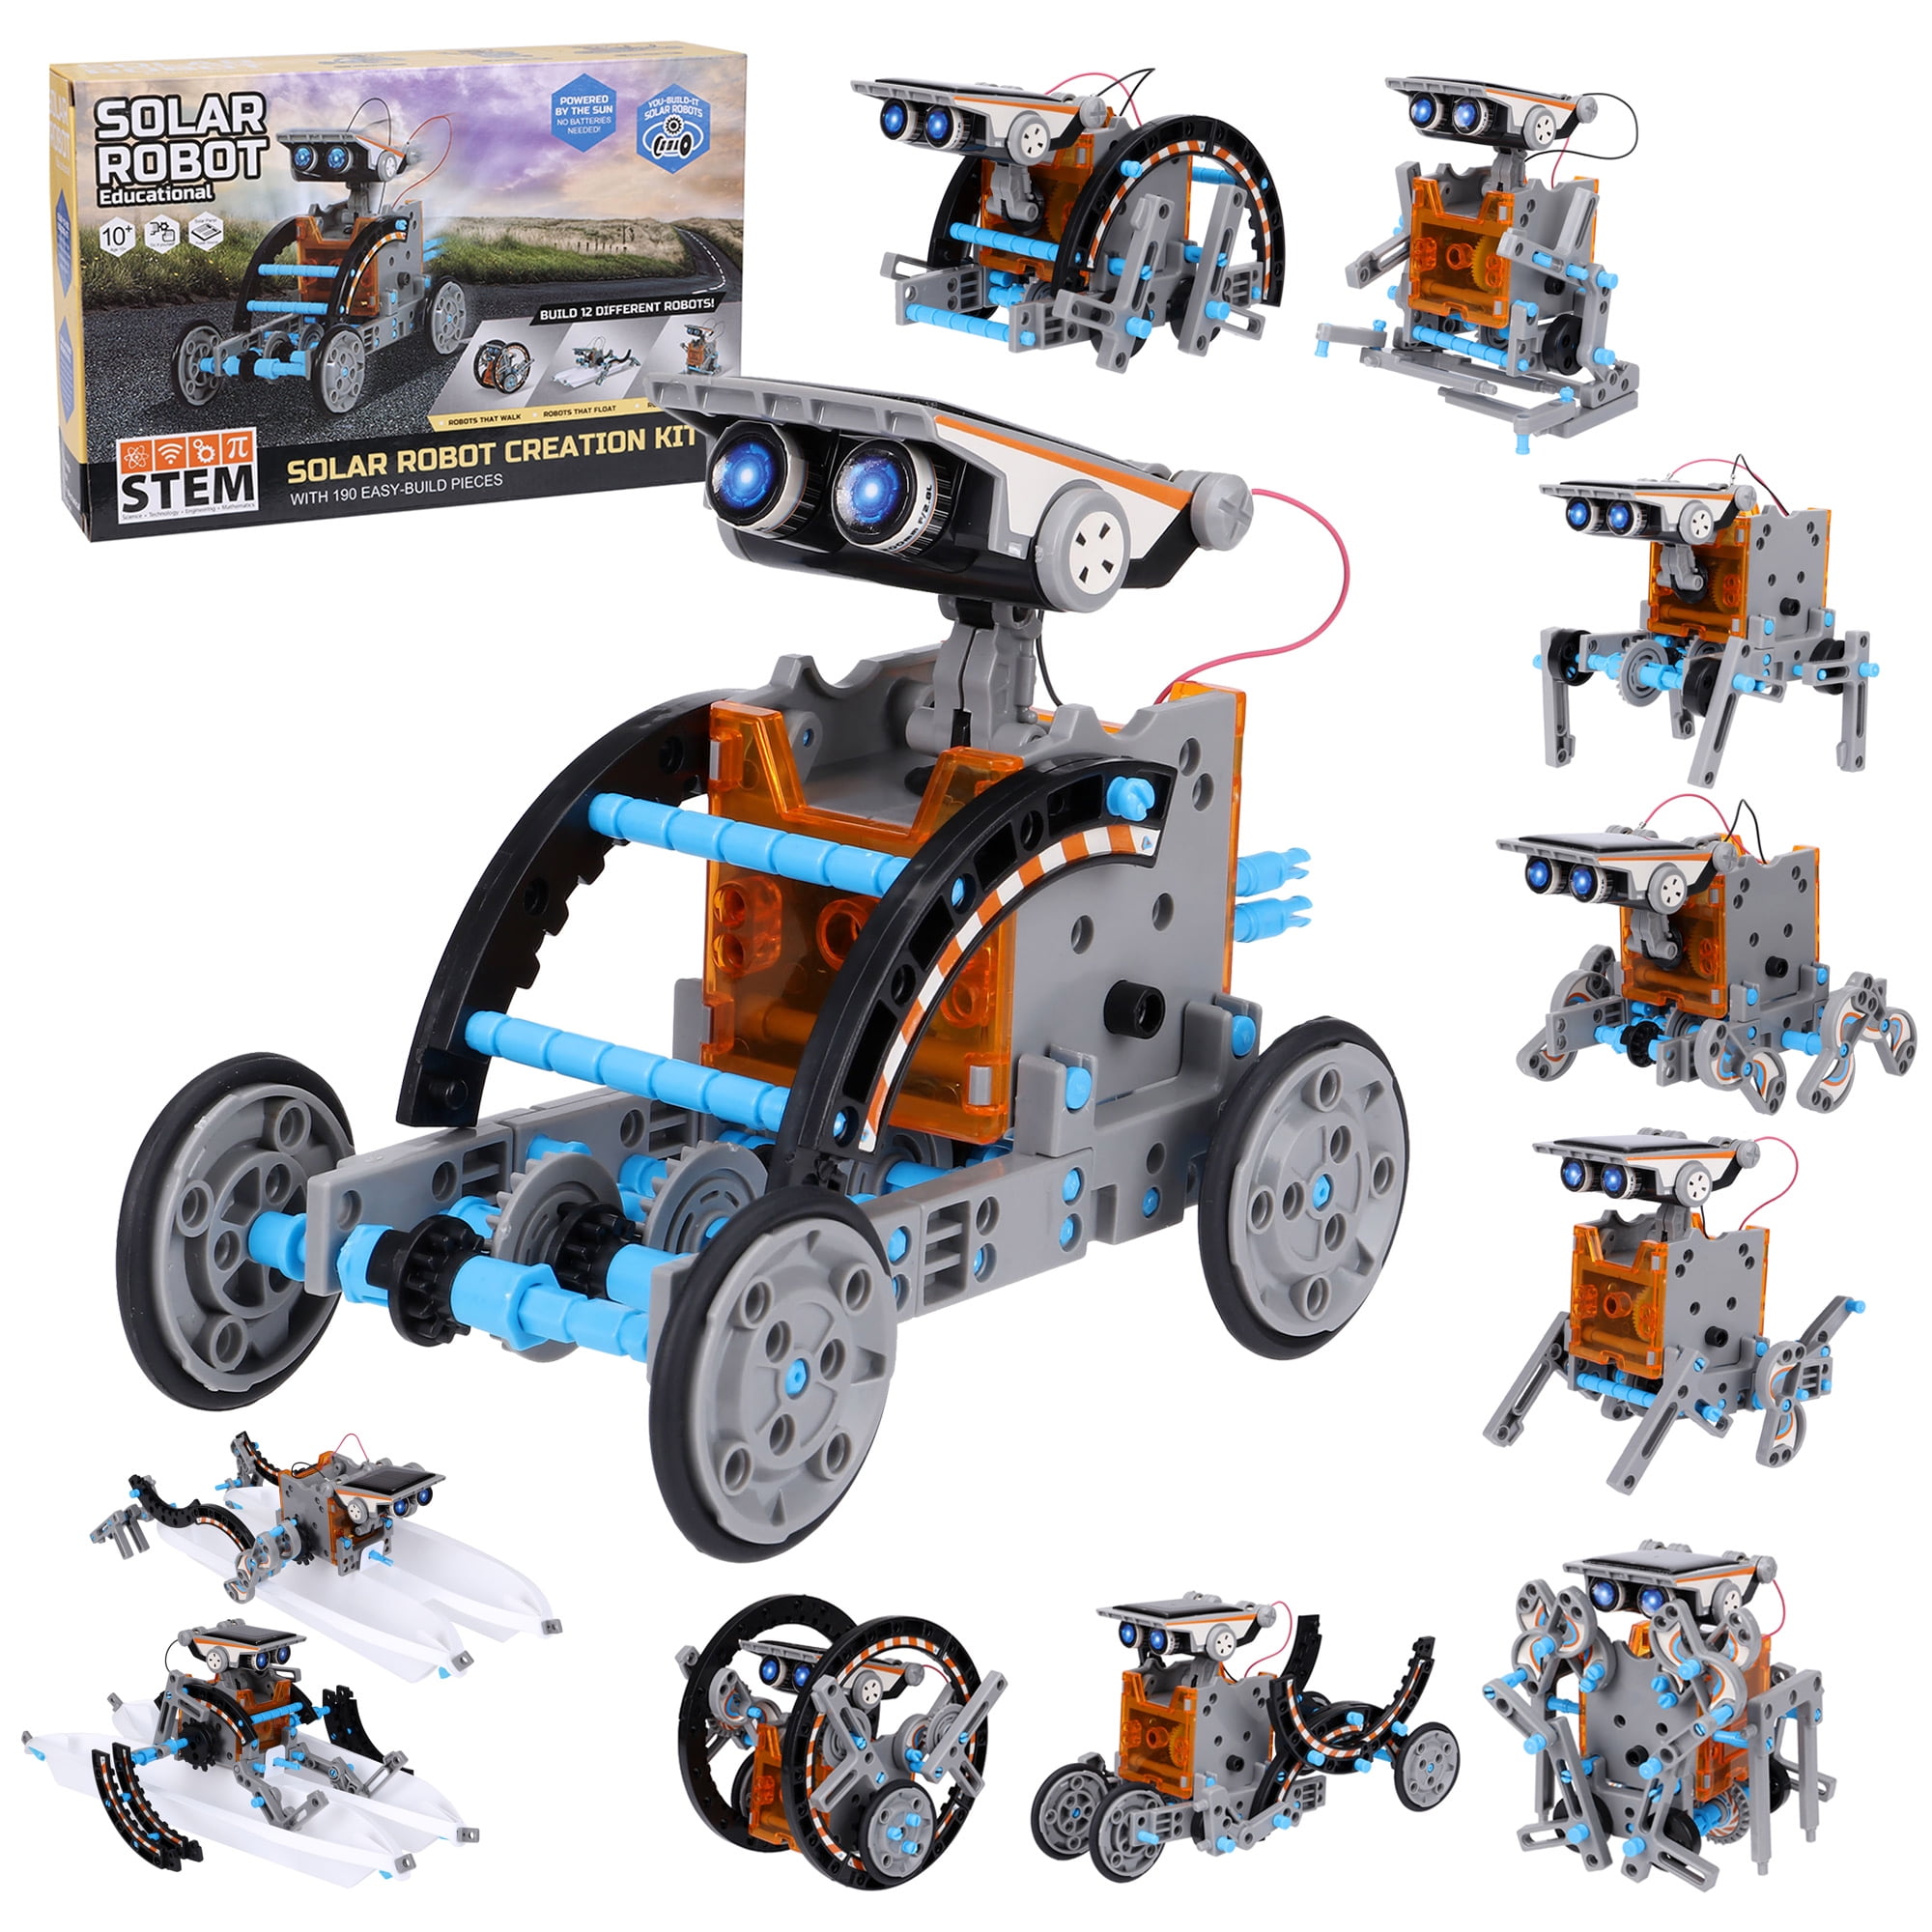 10in1 Robots with Sensors for Ages 8-12 Electronics Engineering